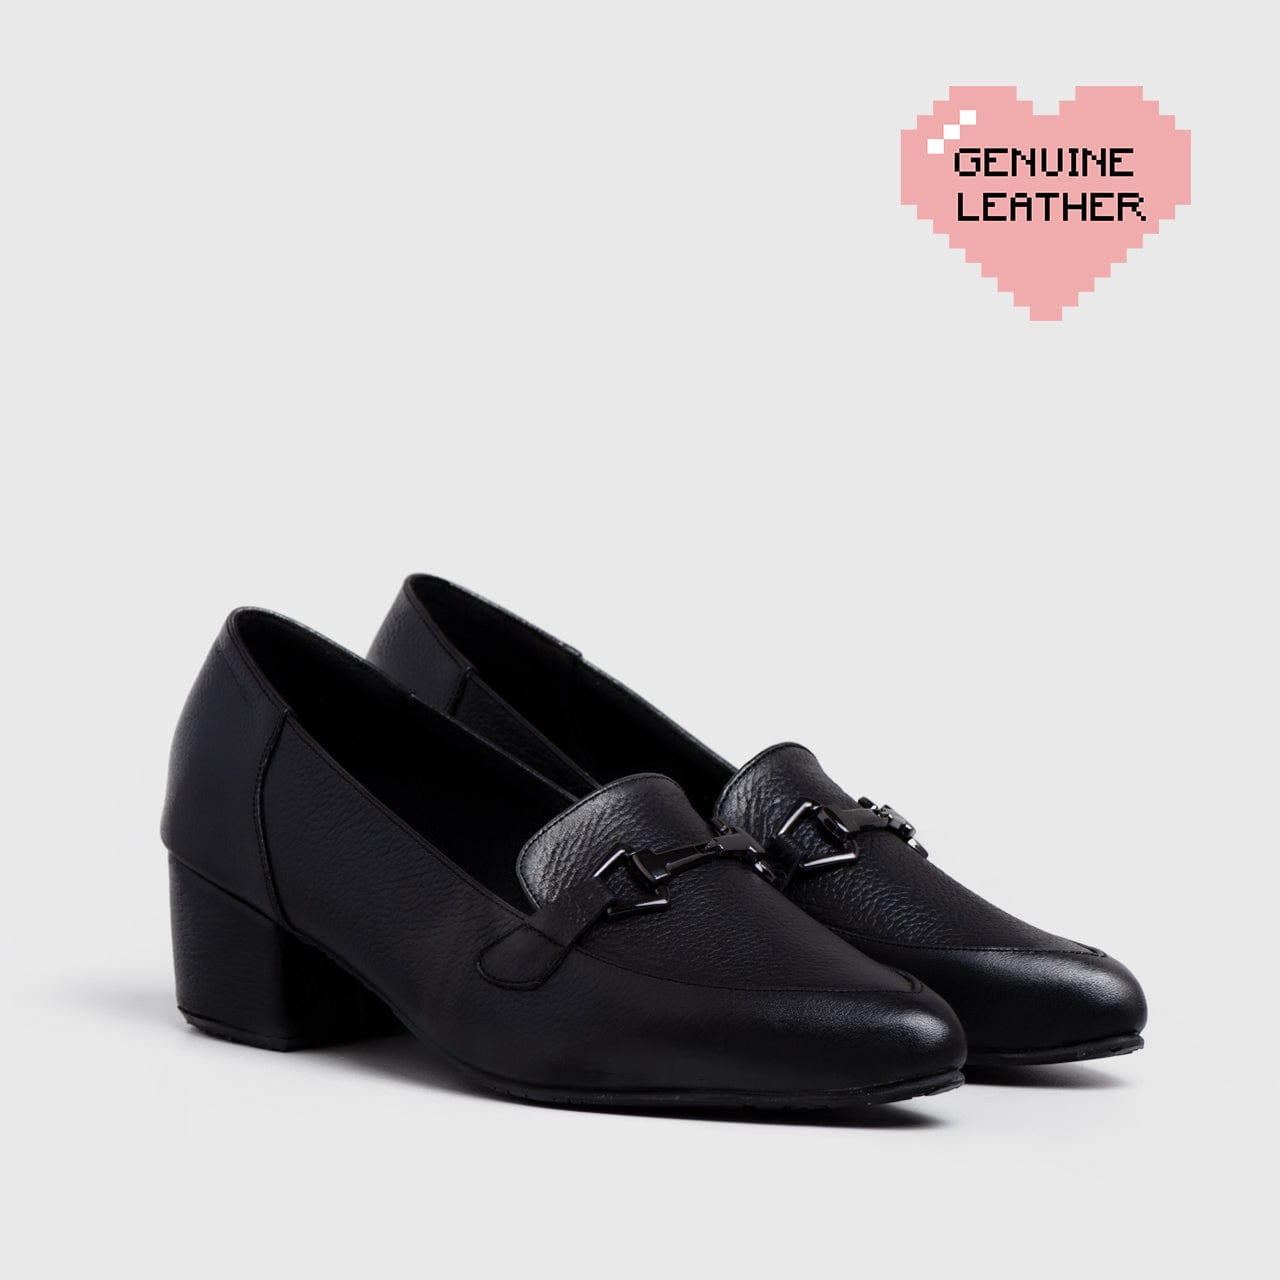 Adorable Projects Official 36 Mulligan Heels Genuine Leather Black